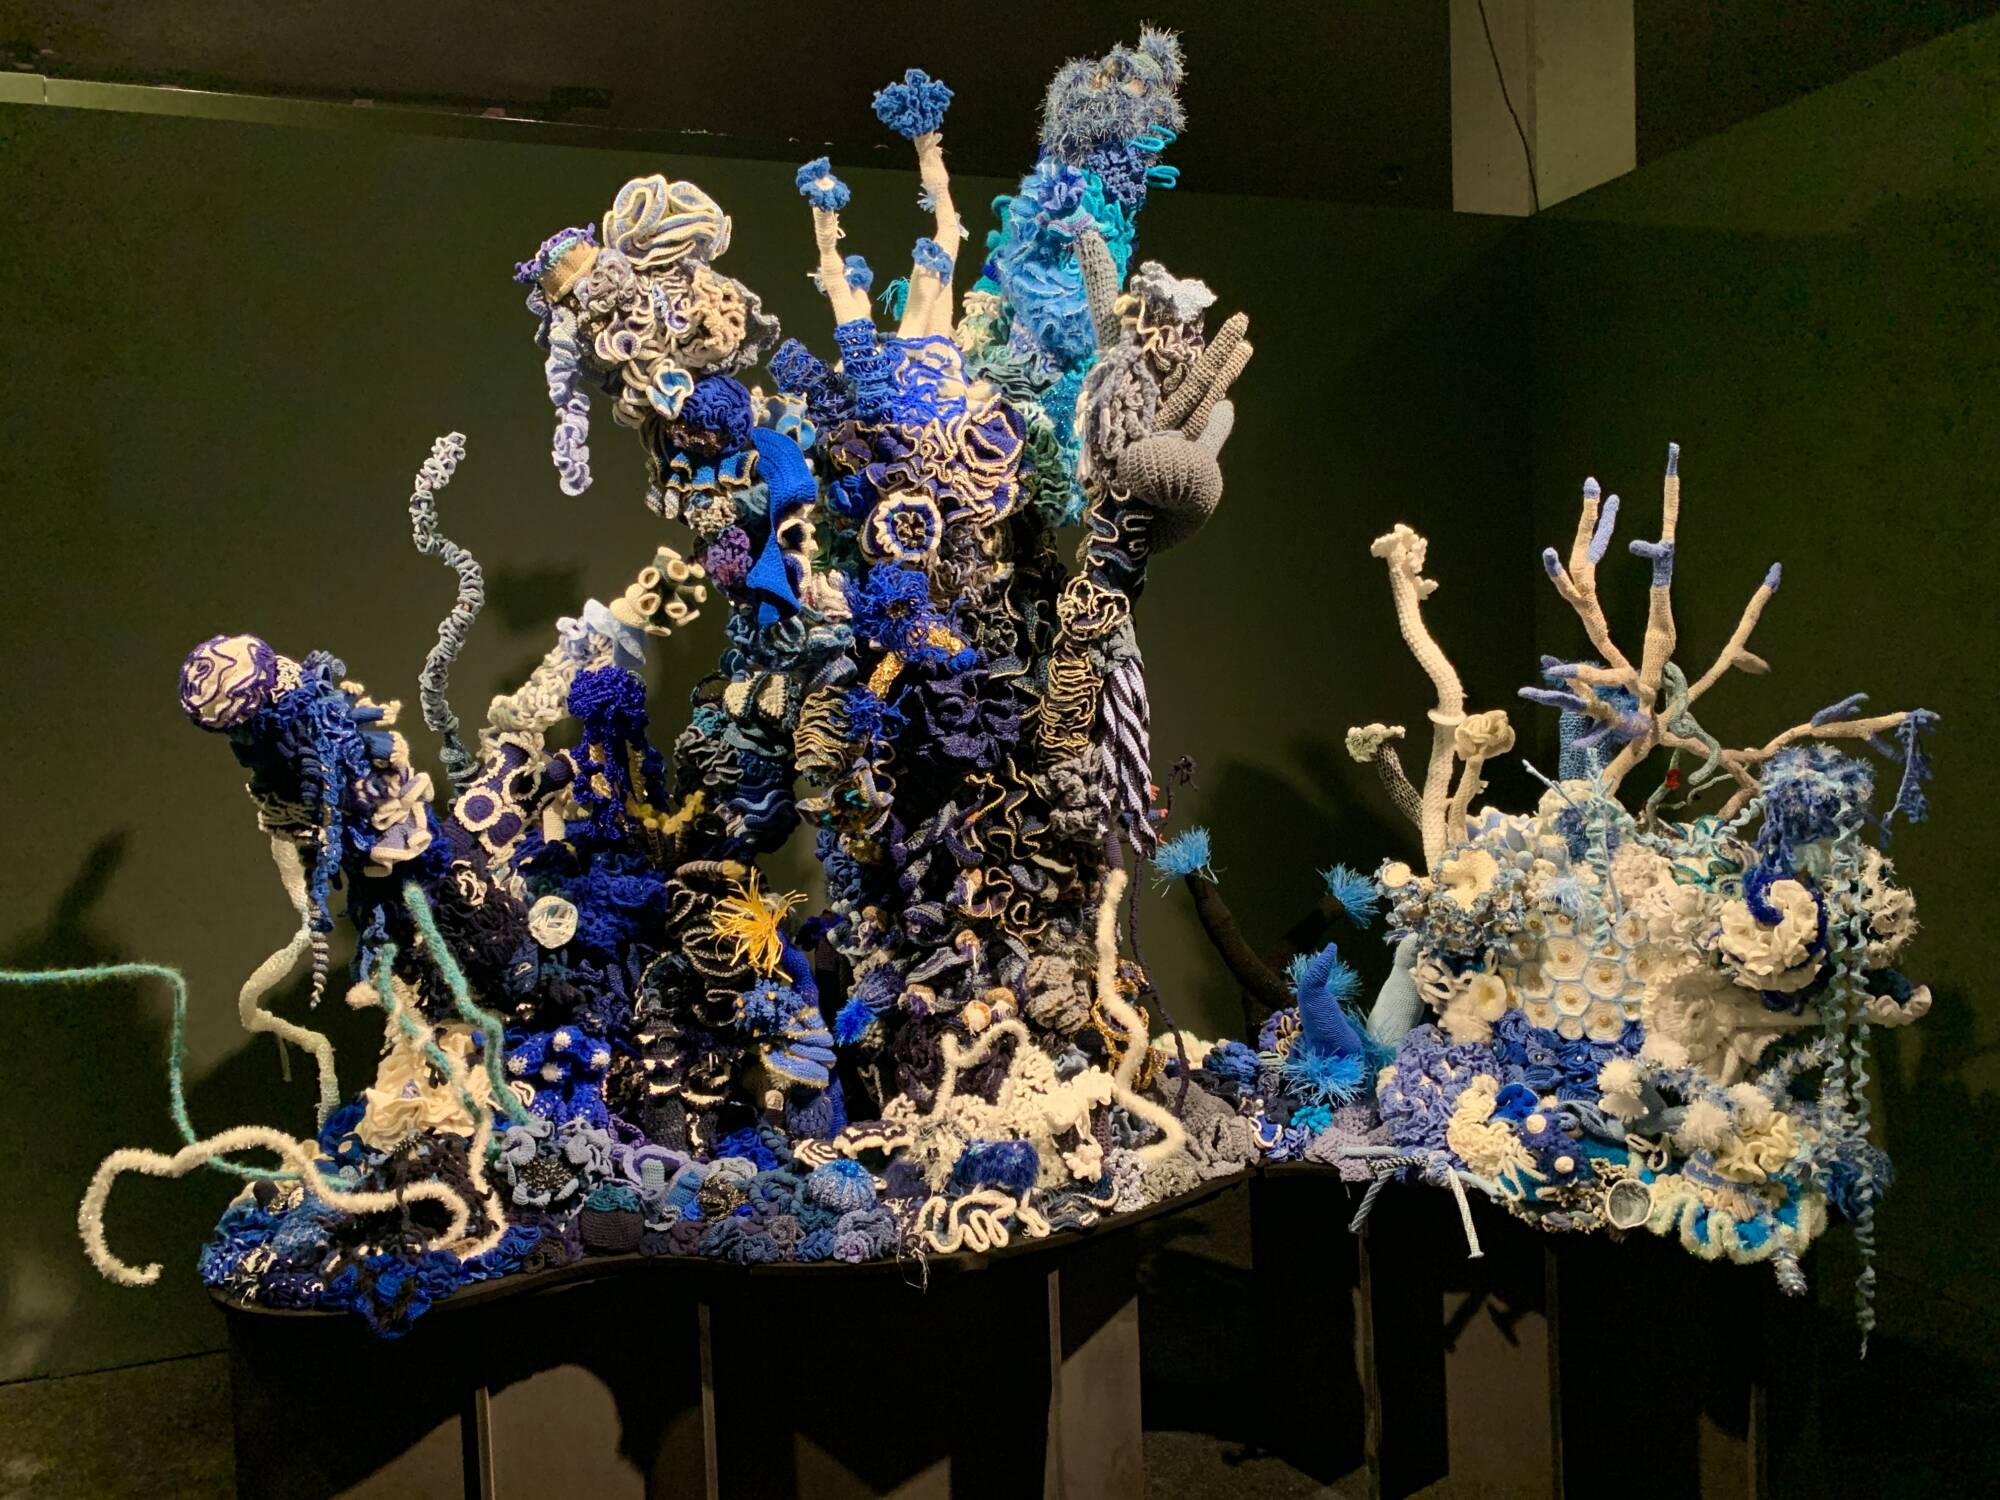 installation of crochet coral sculpture - in blue